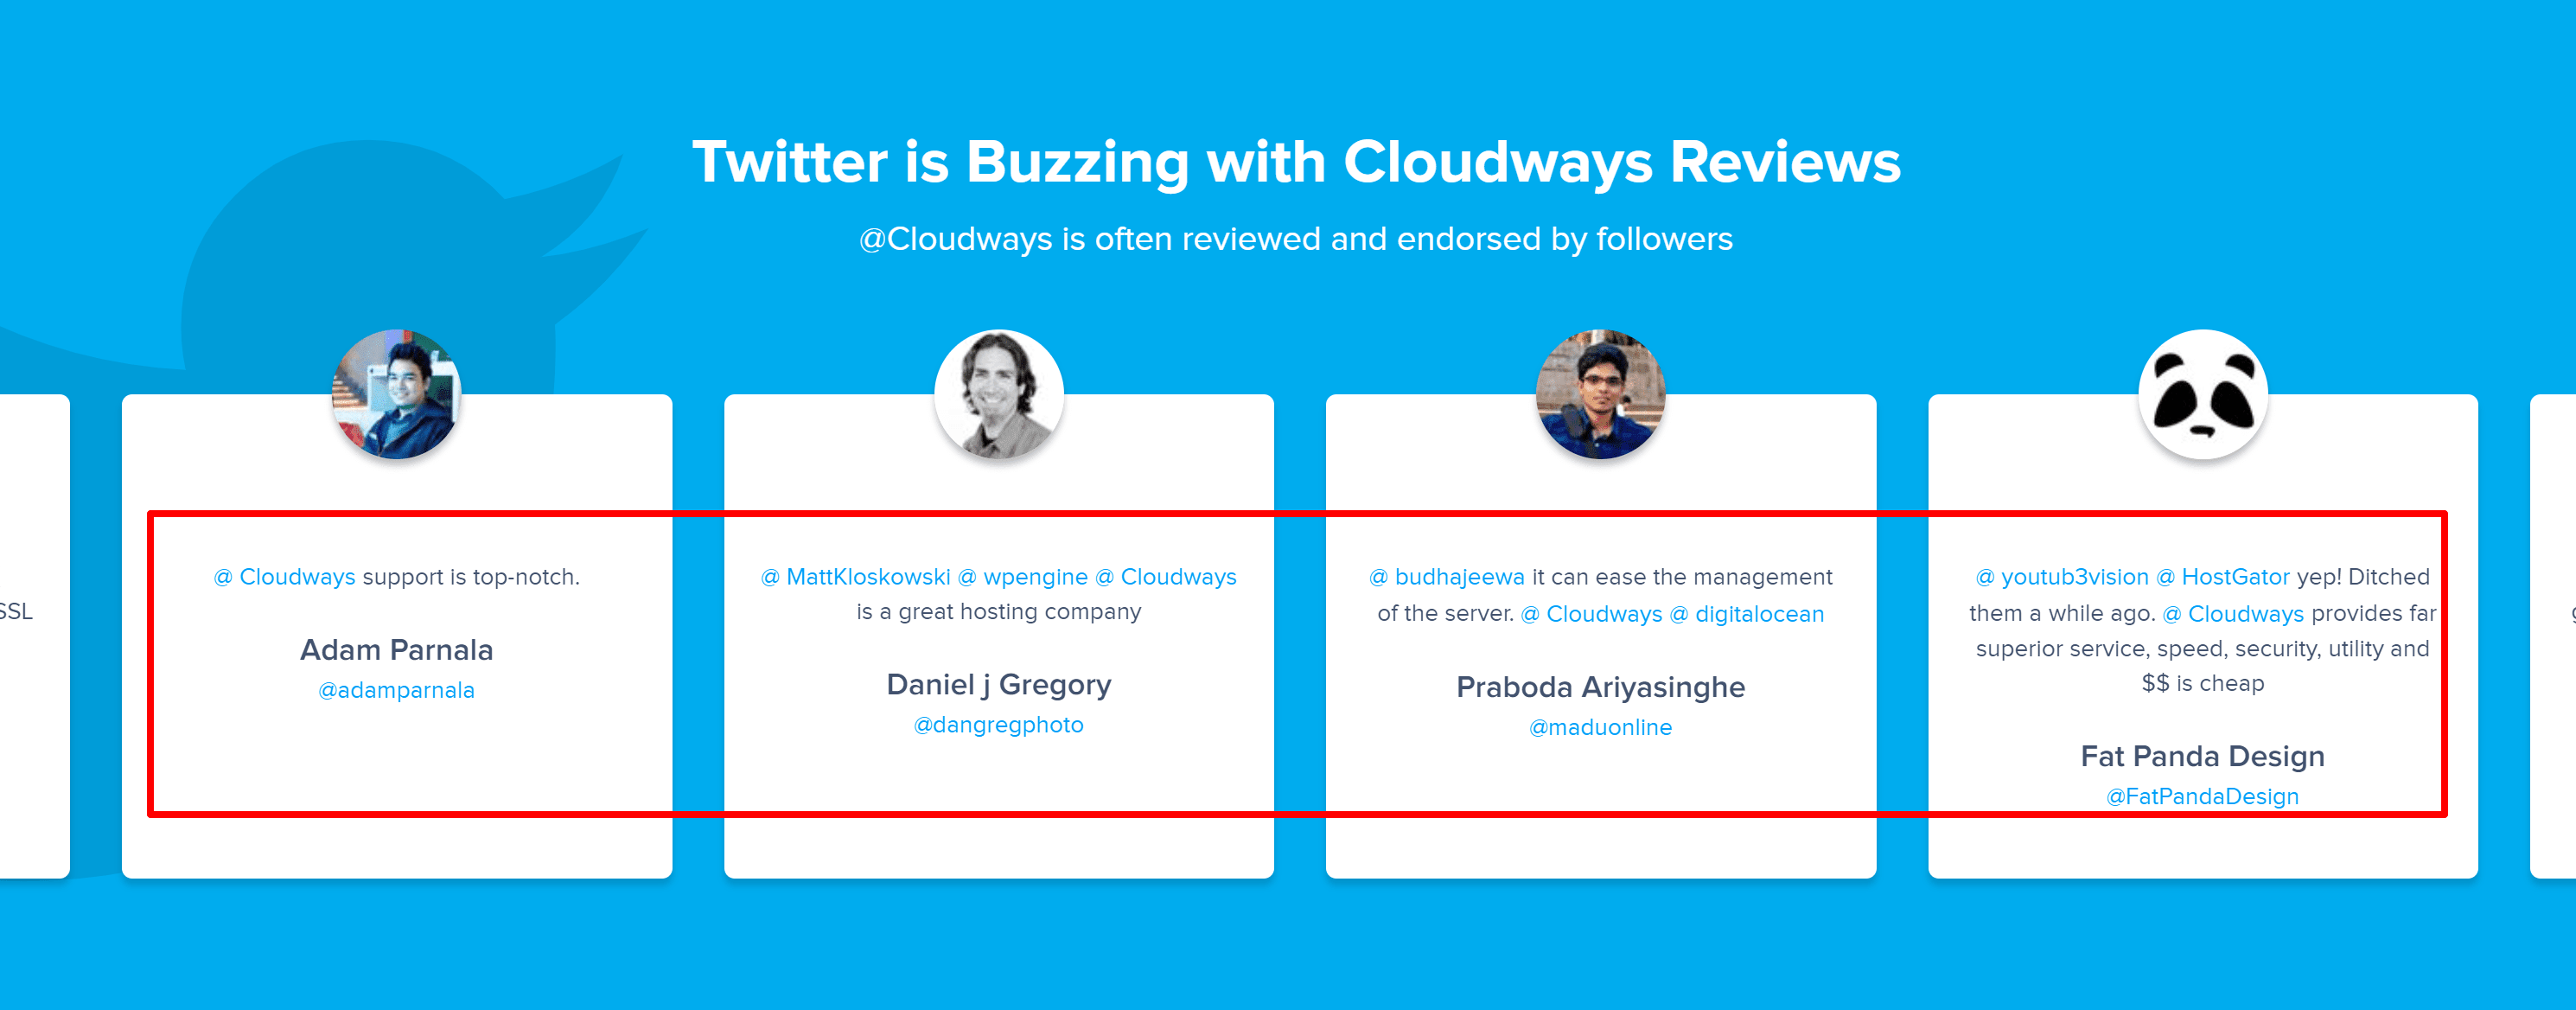 Customer Support At Cloudways